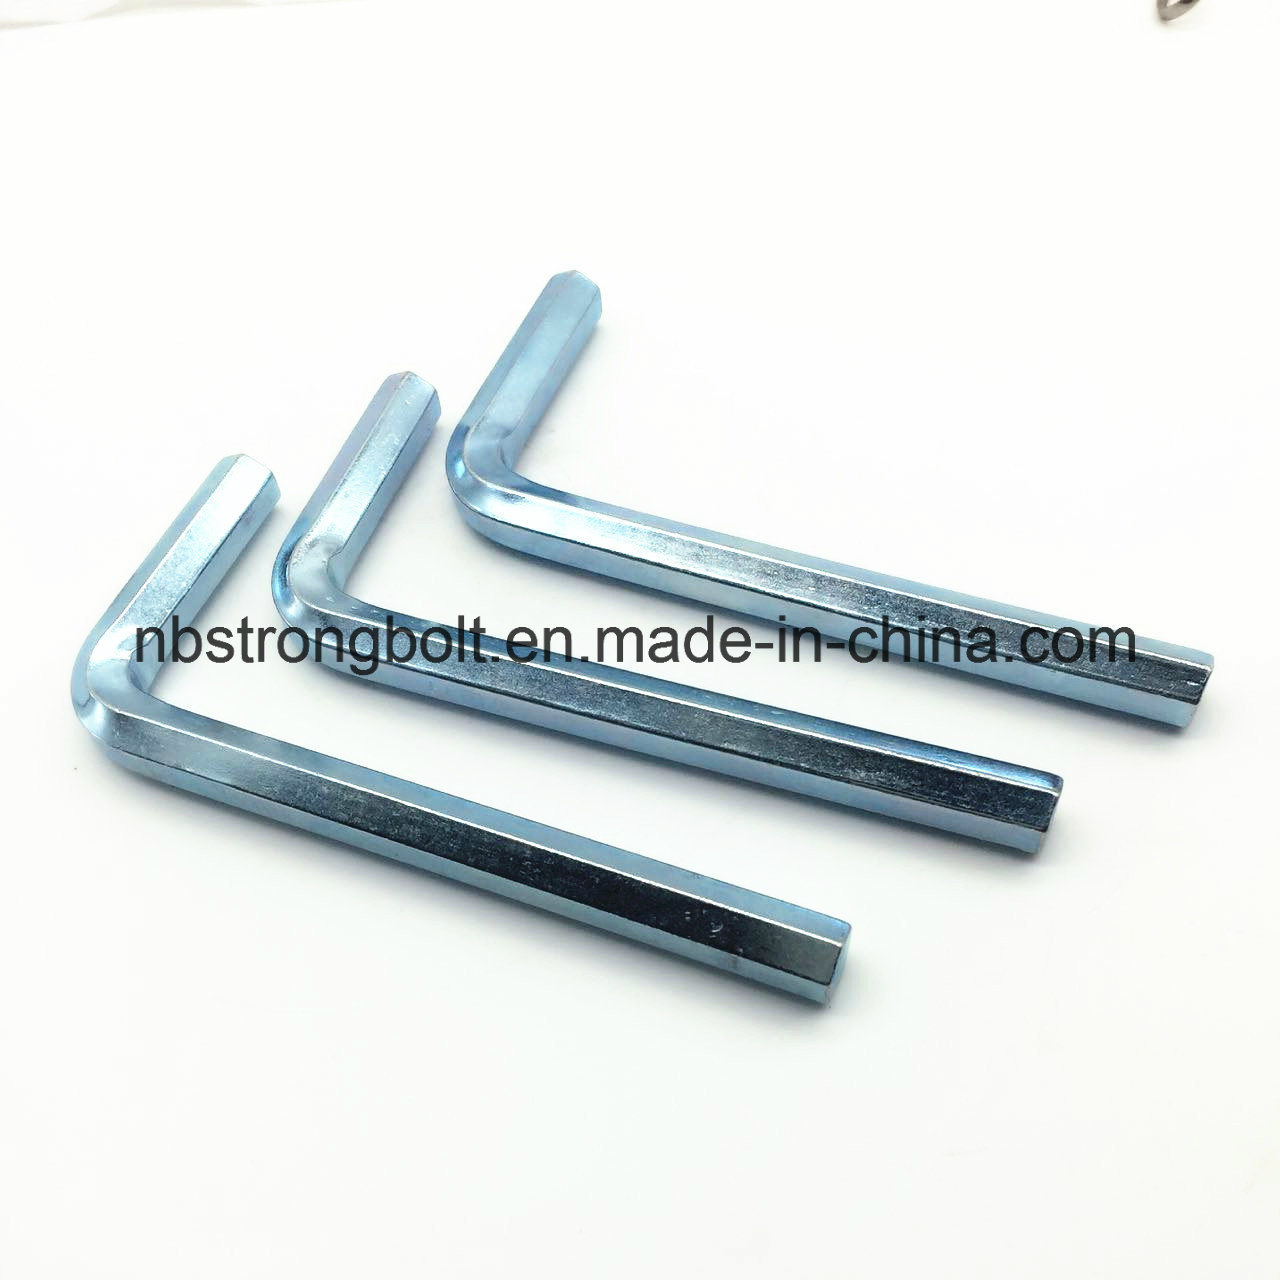 Hex Wrench, Hex Allen Key with Zp